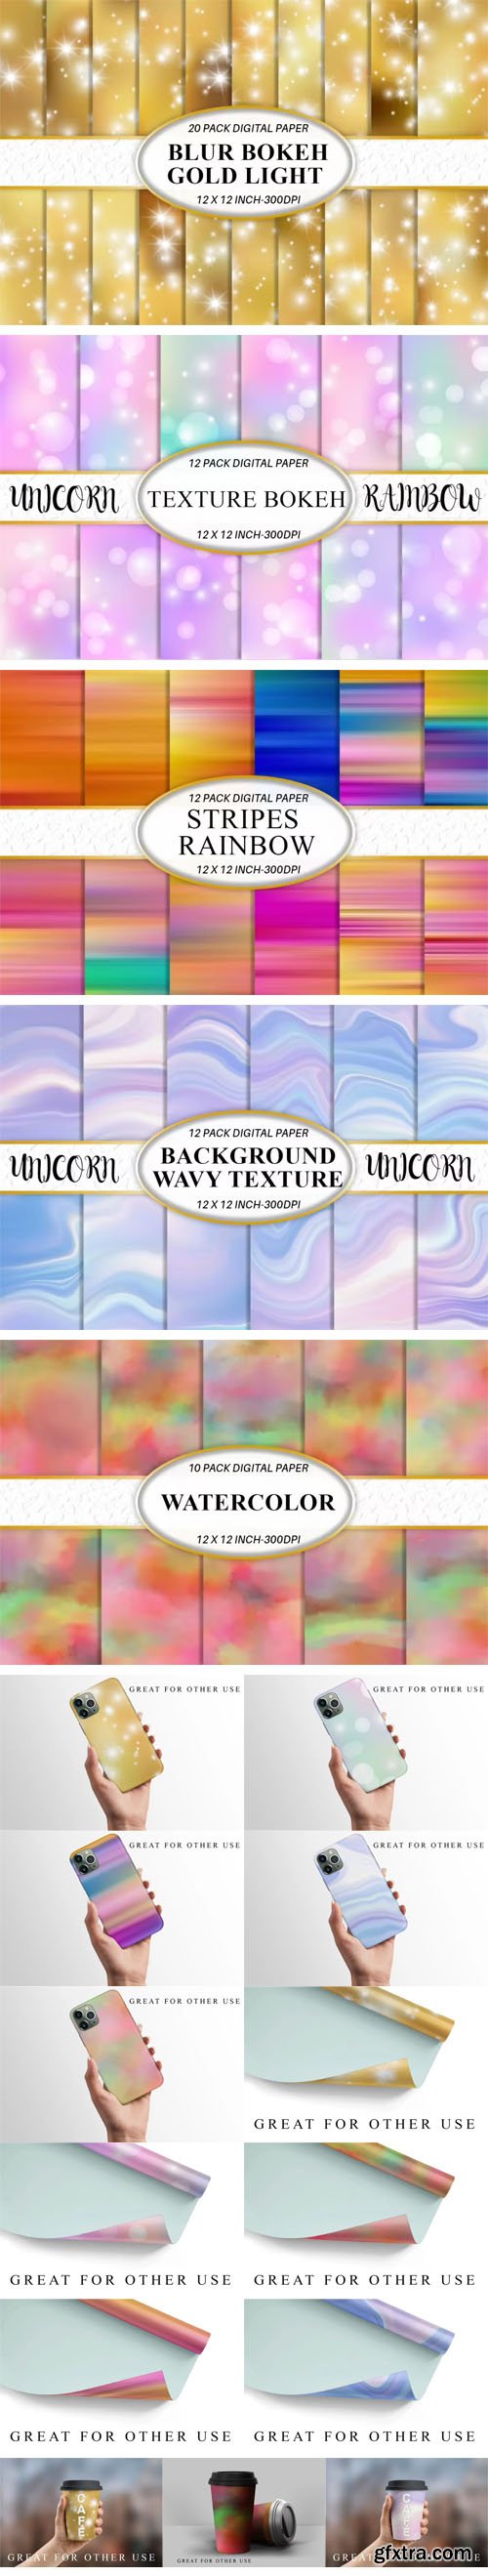 Awesome 5 Packs of Digital Paper Backgrounds Collection